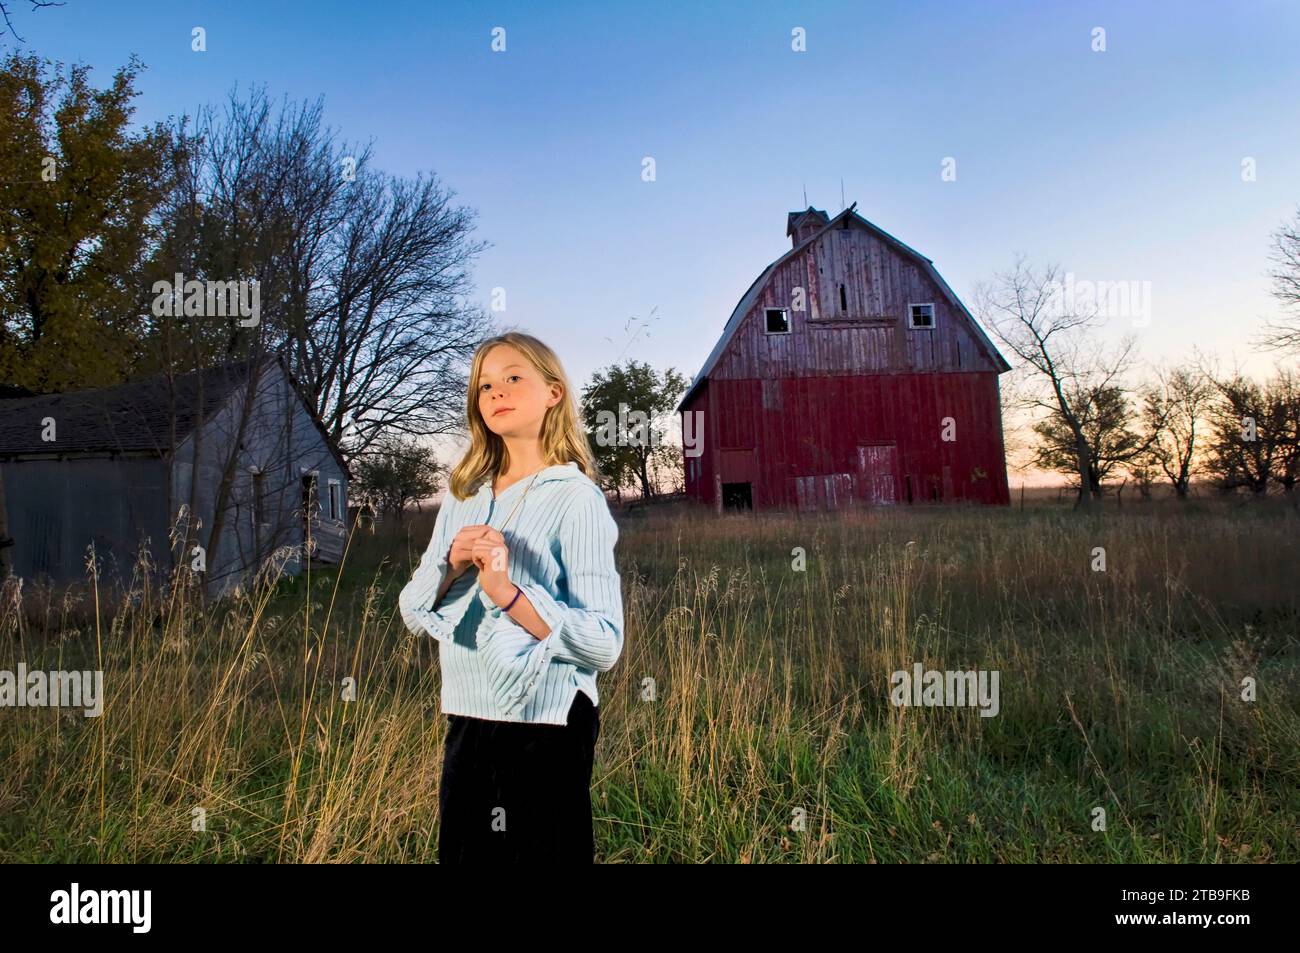 Girl stands for her portrait with a historic barn in the background; Princeton, Nebraska, United States of America Stock Photo